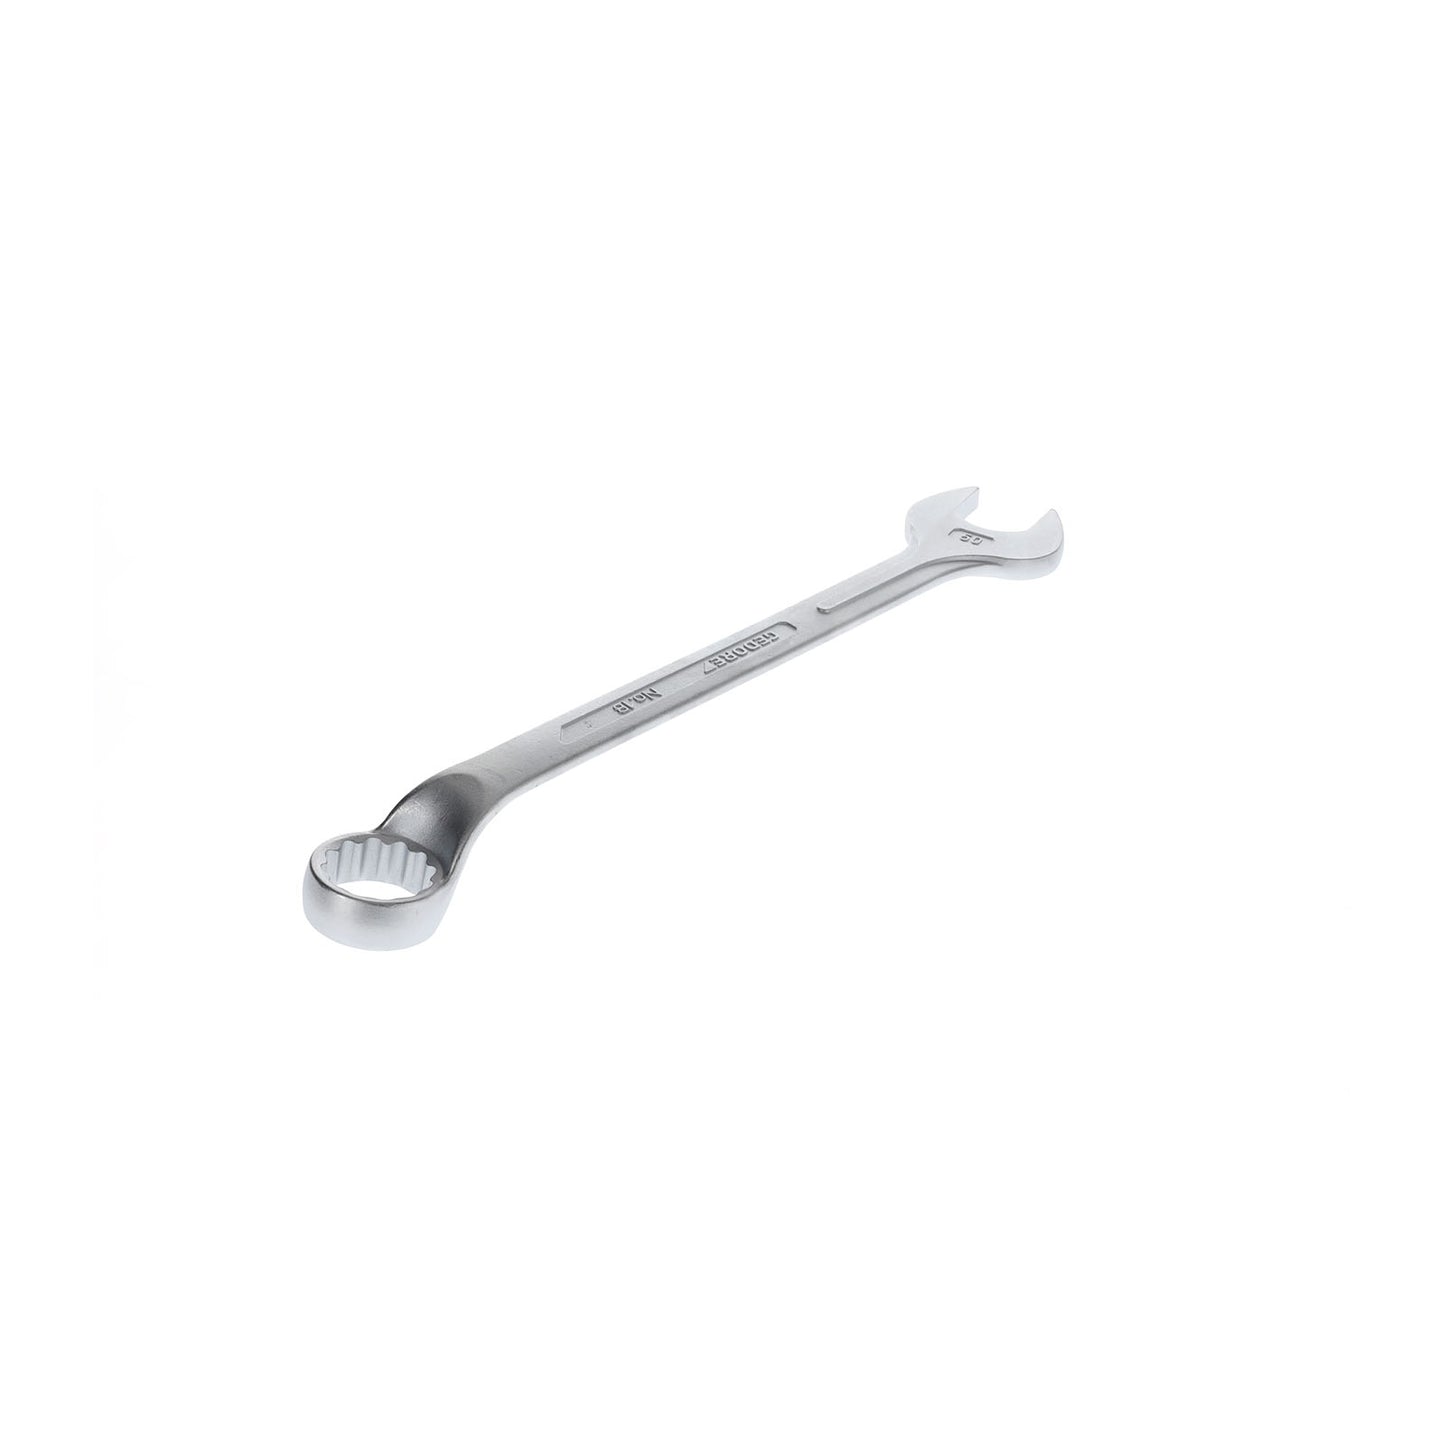 GEDORE 1 B 50 - Offset Combination Wrench, 50mm (6003850)